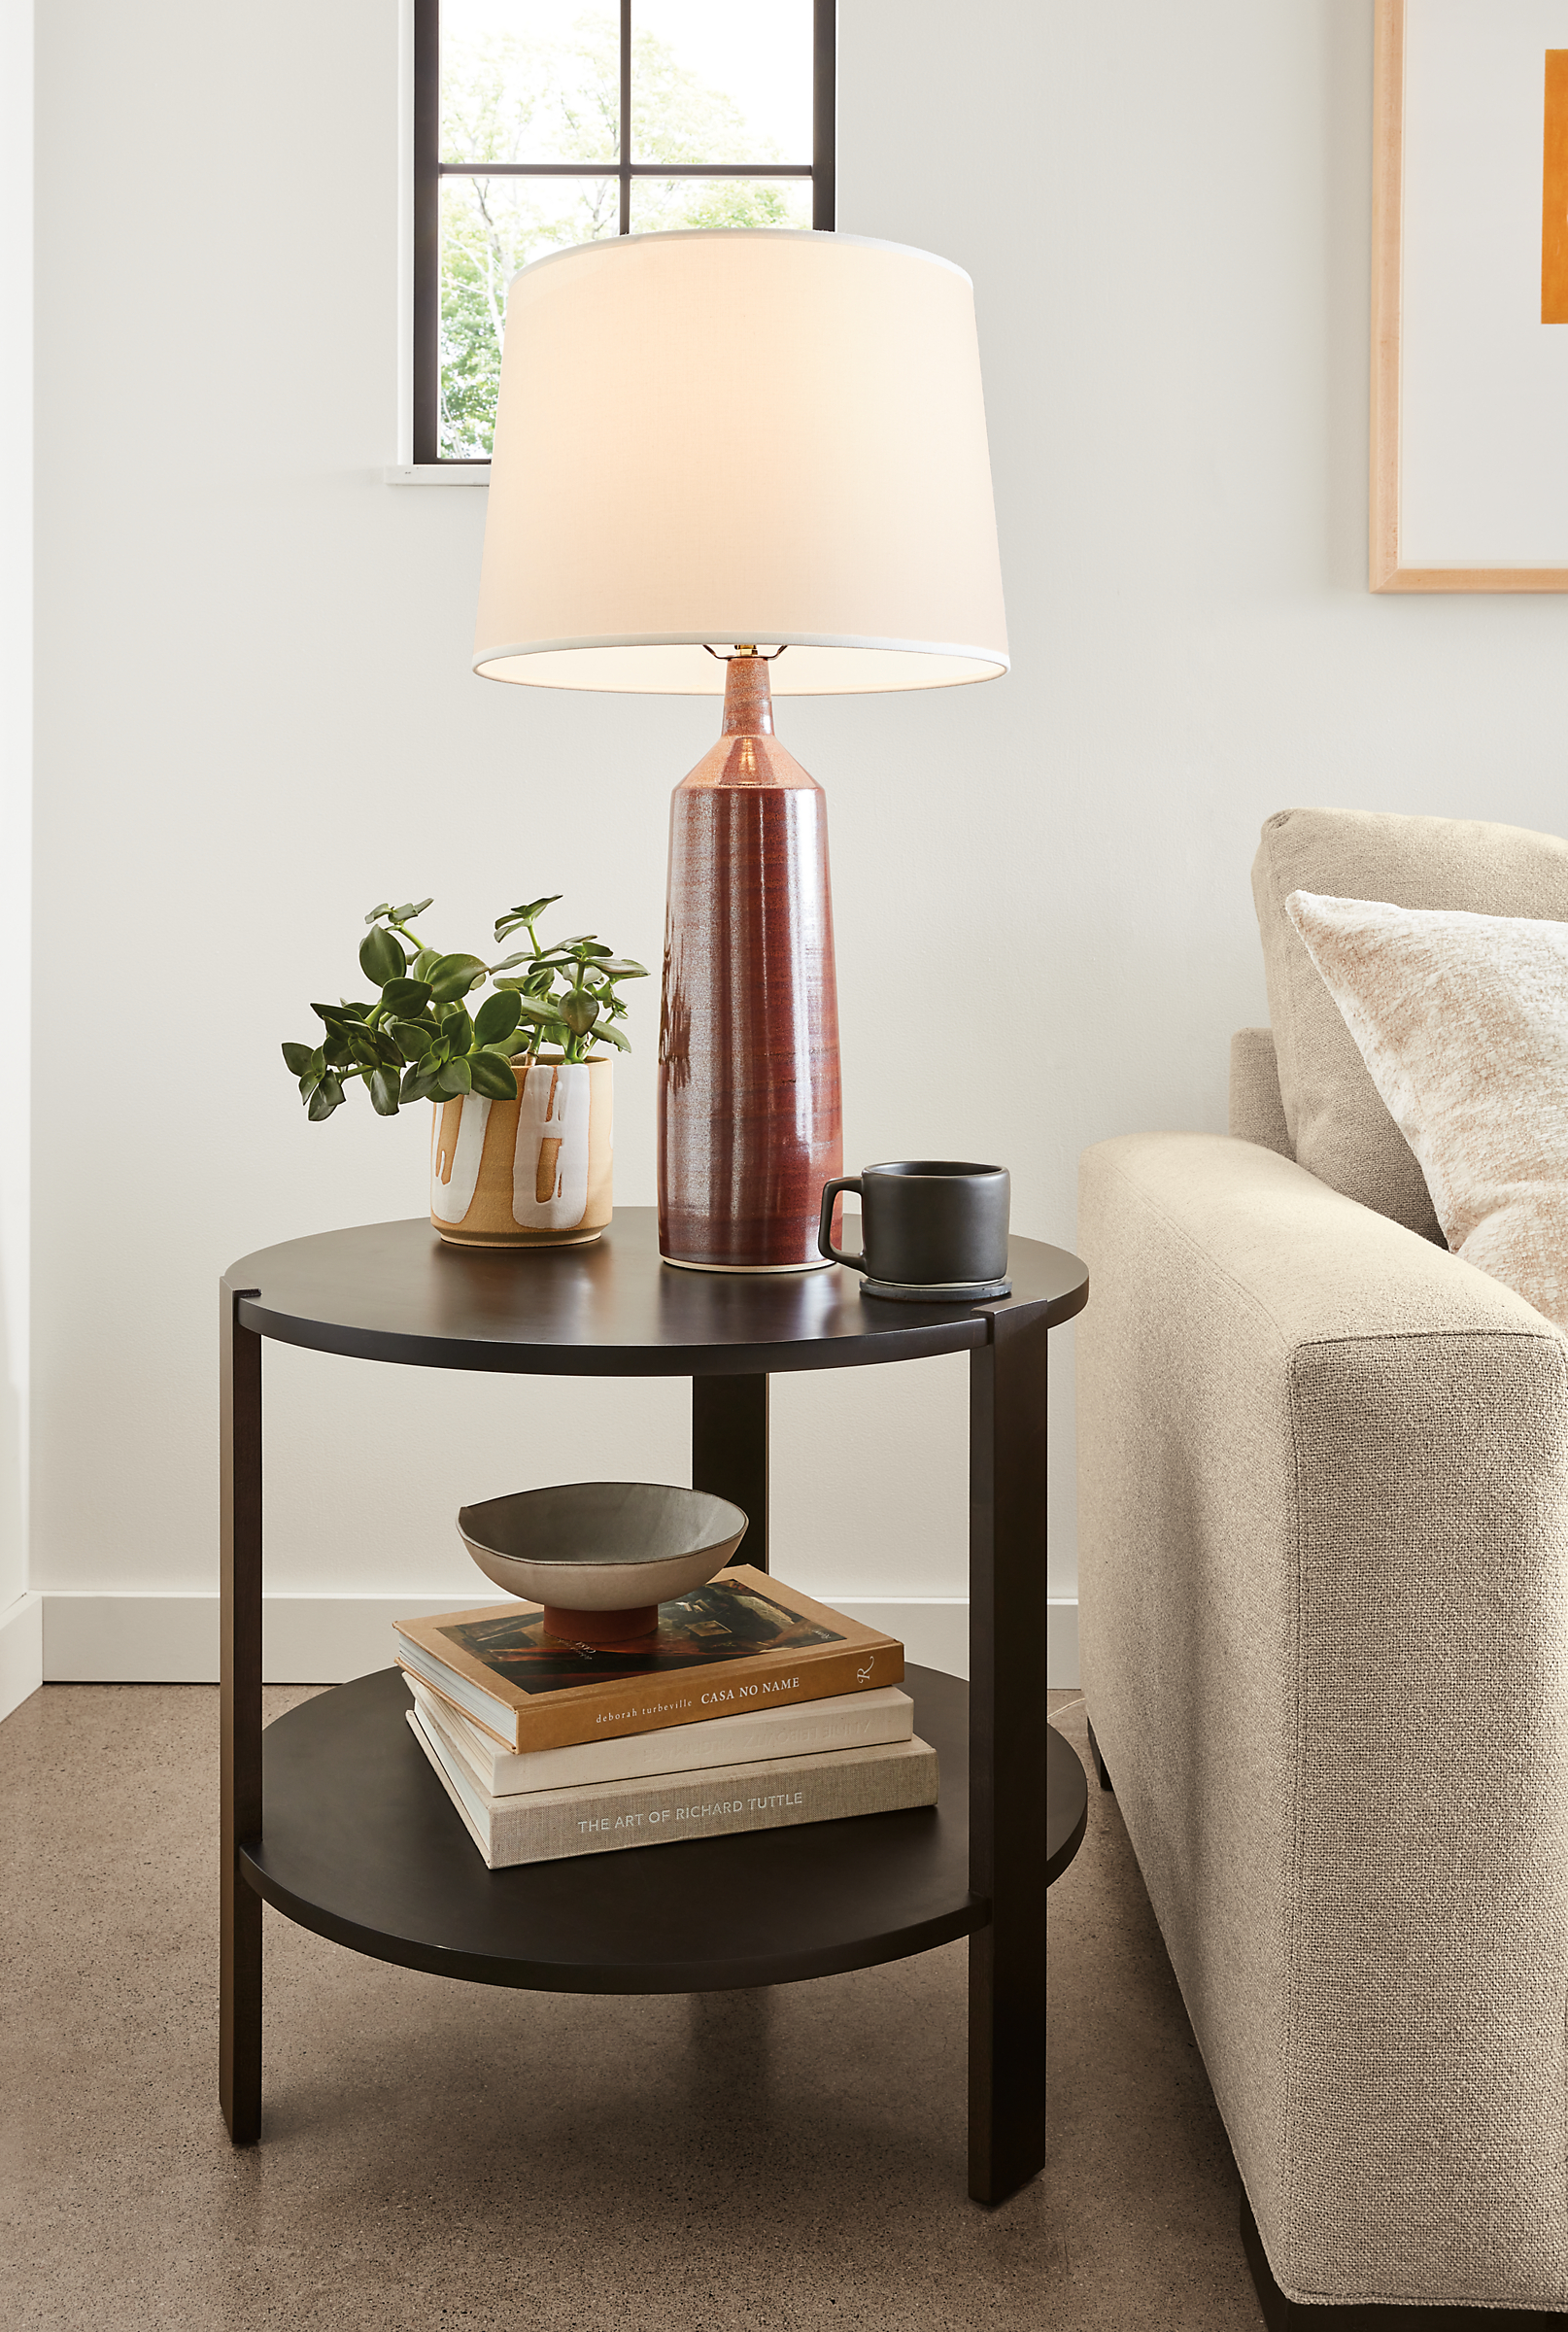 Greene 24-round end table in Charcoal with a Monarch table lamp.